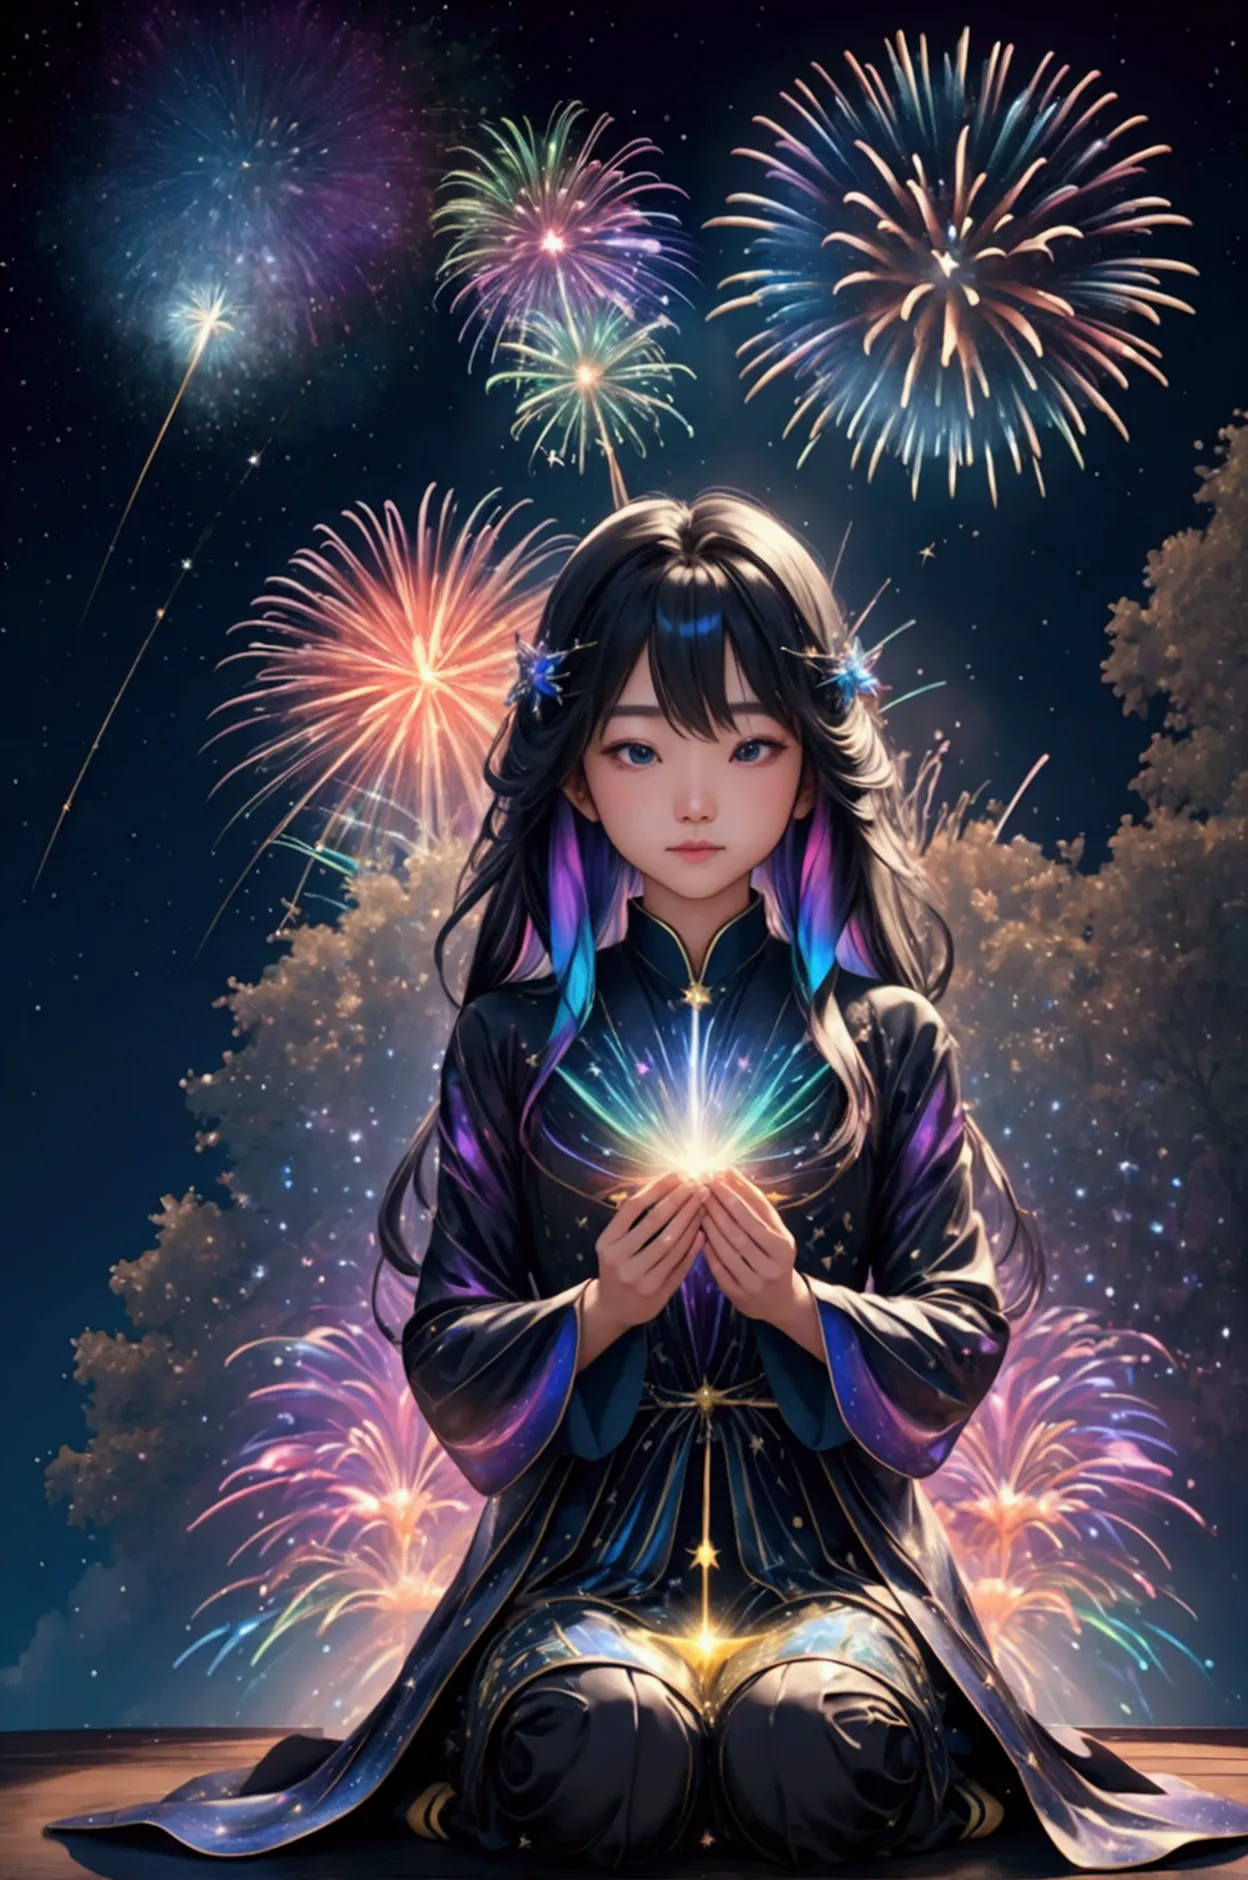 The world we see、Iridescent幻想的なNight Sky、constellation,Mysterious Landscape、firework、firework大会、Iridescentfireworkが打ちあがっている瞬間、夜n...